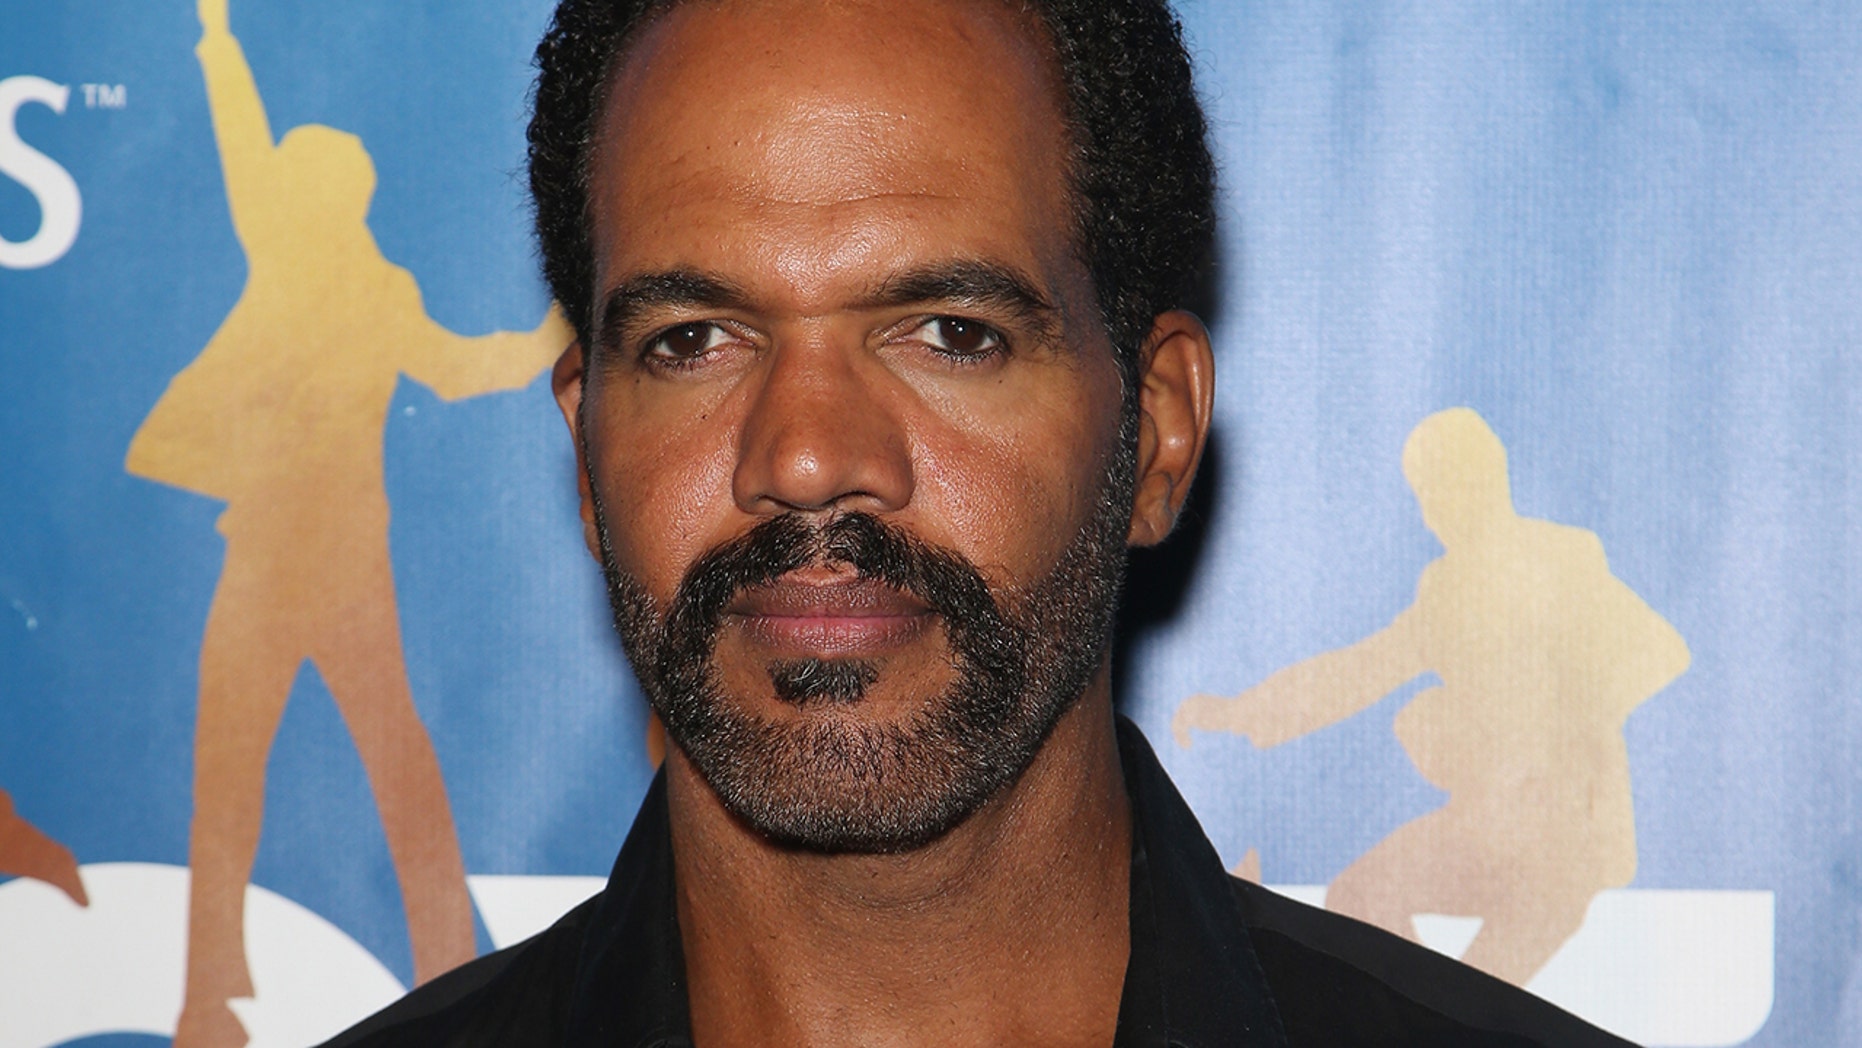 Kristoff St. John was found dead at age 52. He is best known for his role on "The Young and the Restless."